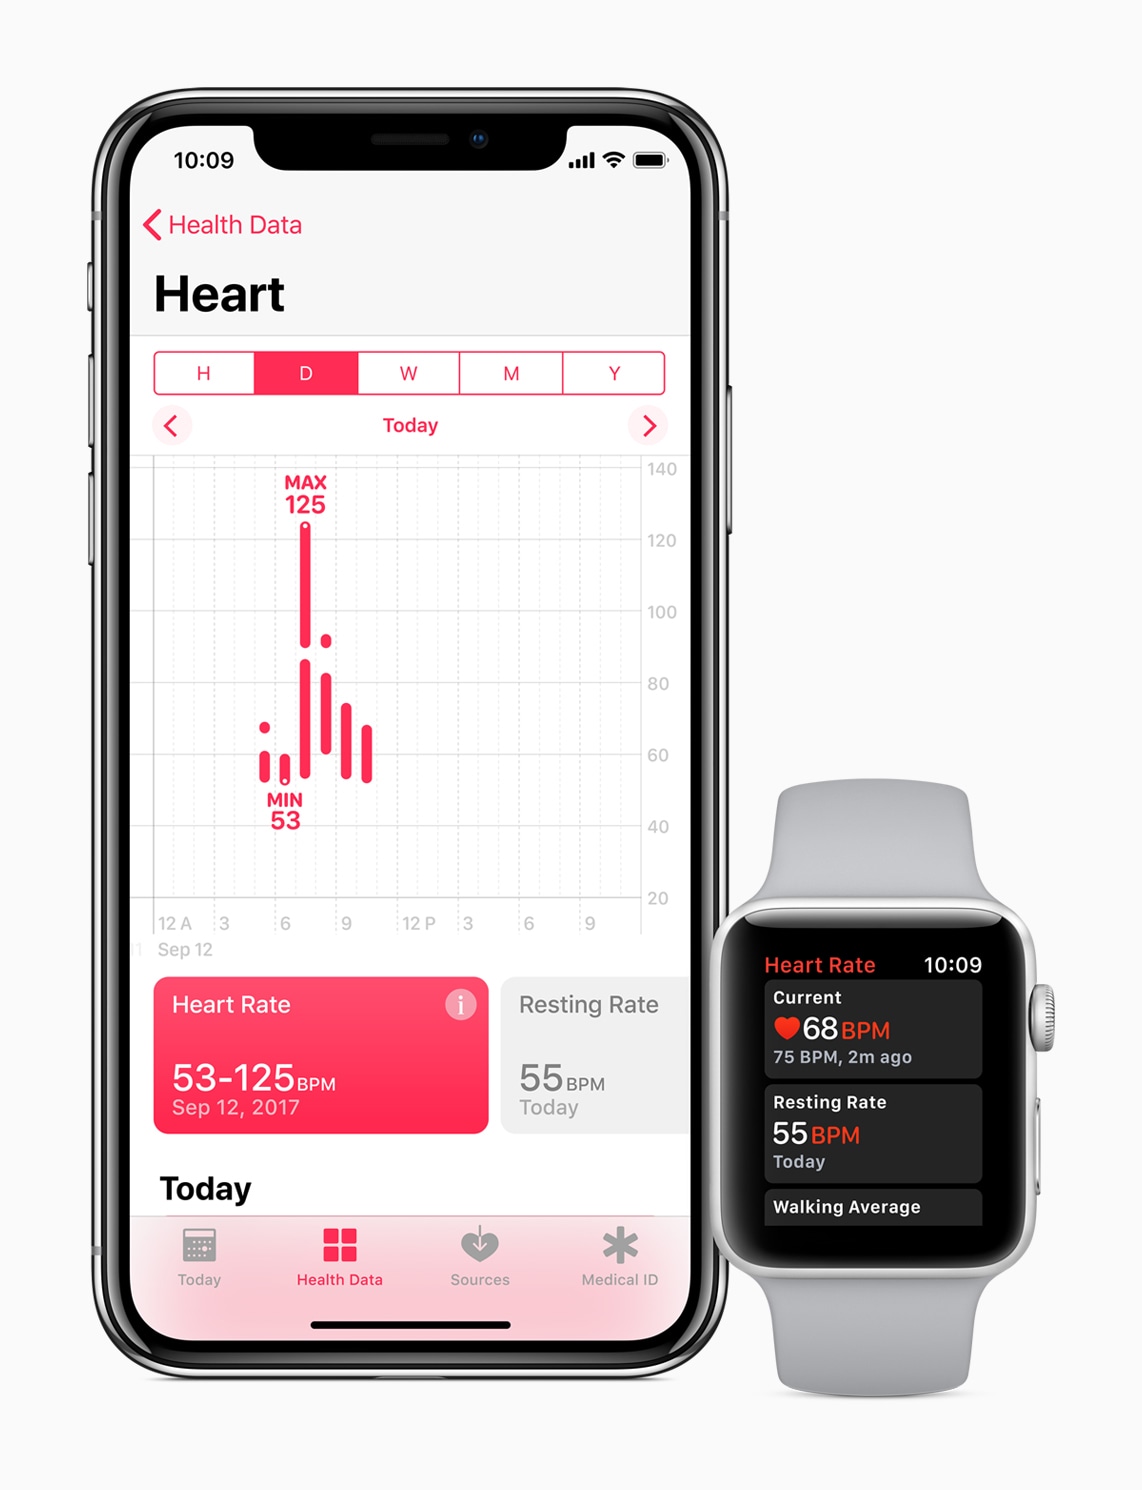 Heart rate measurement with Apple Watch Series 3 and iPhone X